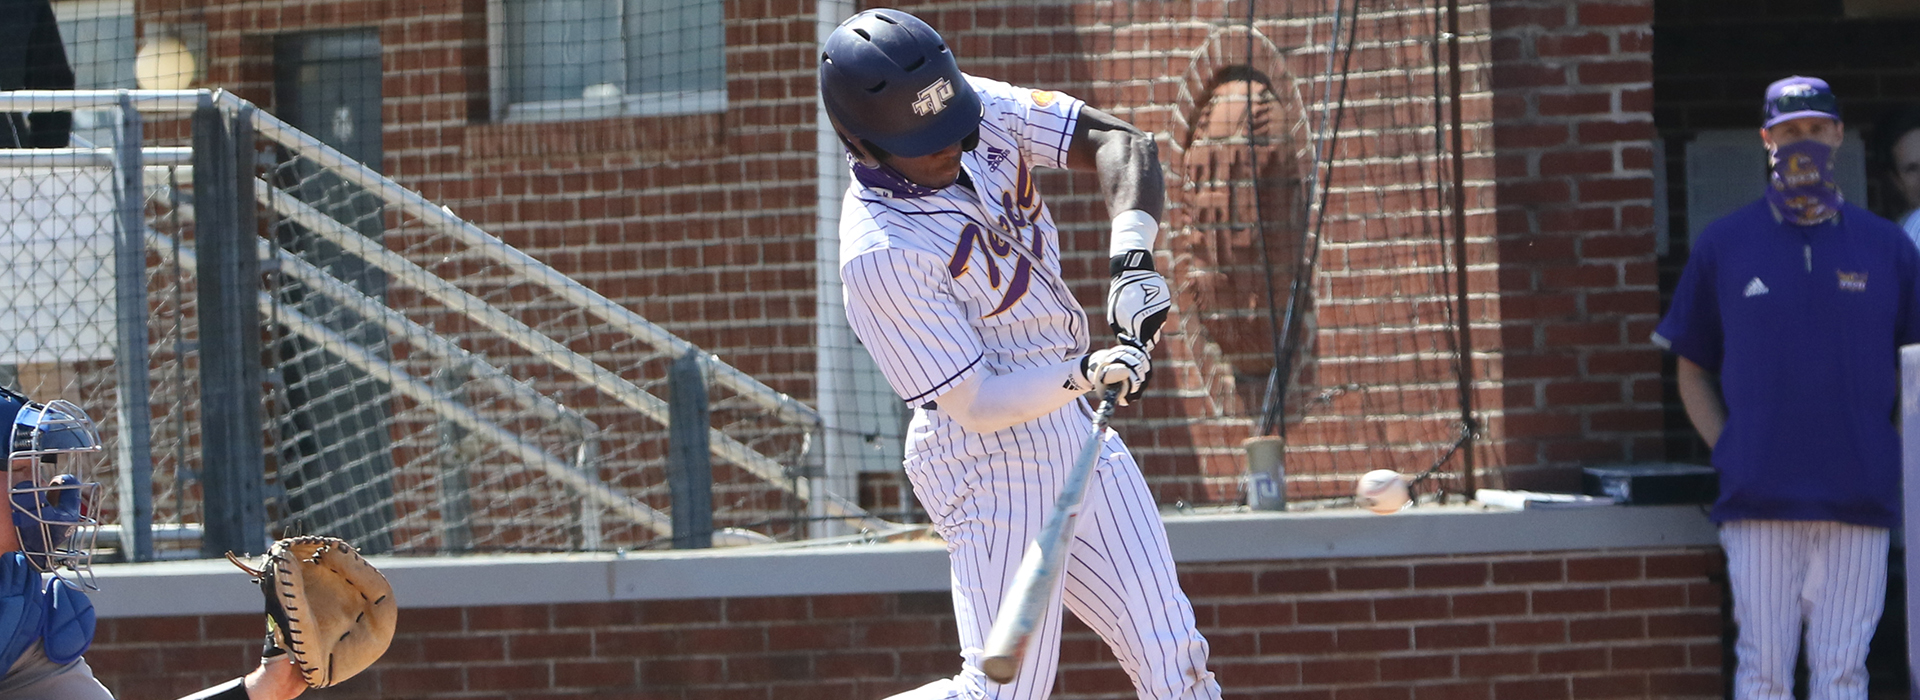 Golden Eagles clinch second-straight OVC series with 9-1 win over EIU